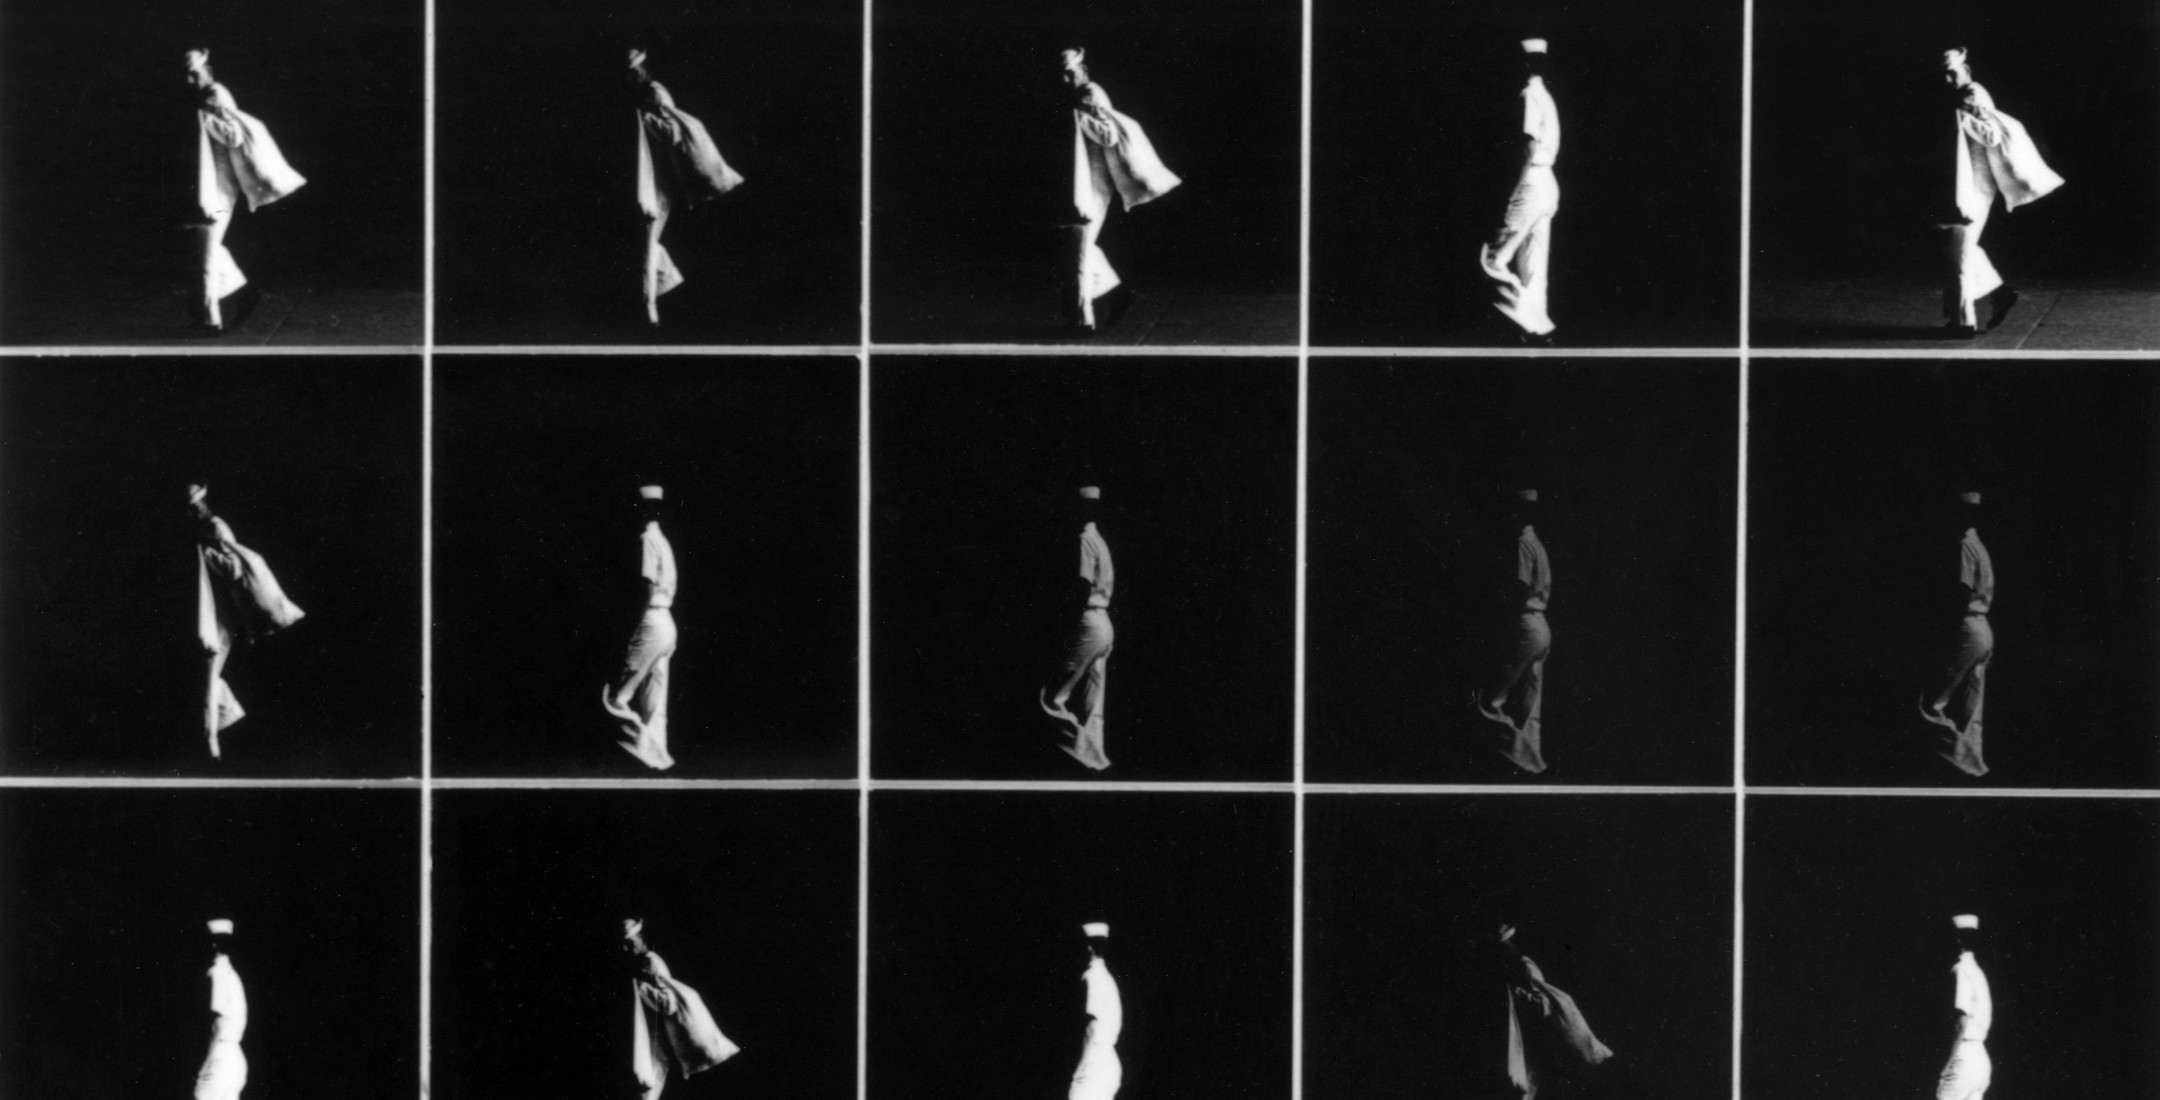 Sequence of black and white photos showing a navy sailor walking in shadow.